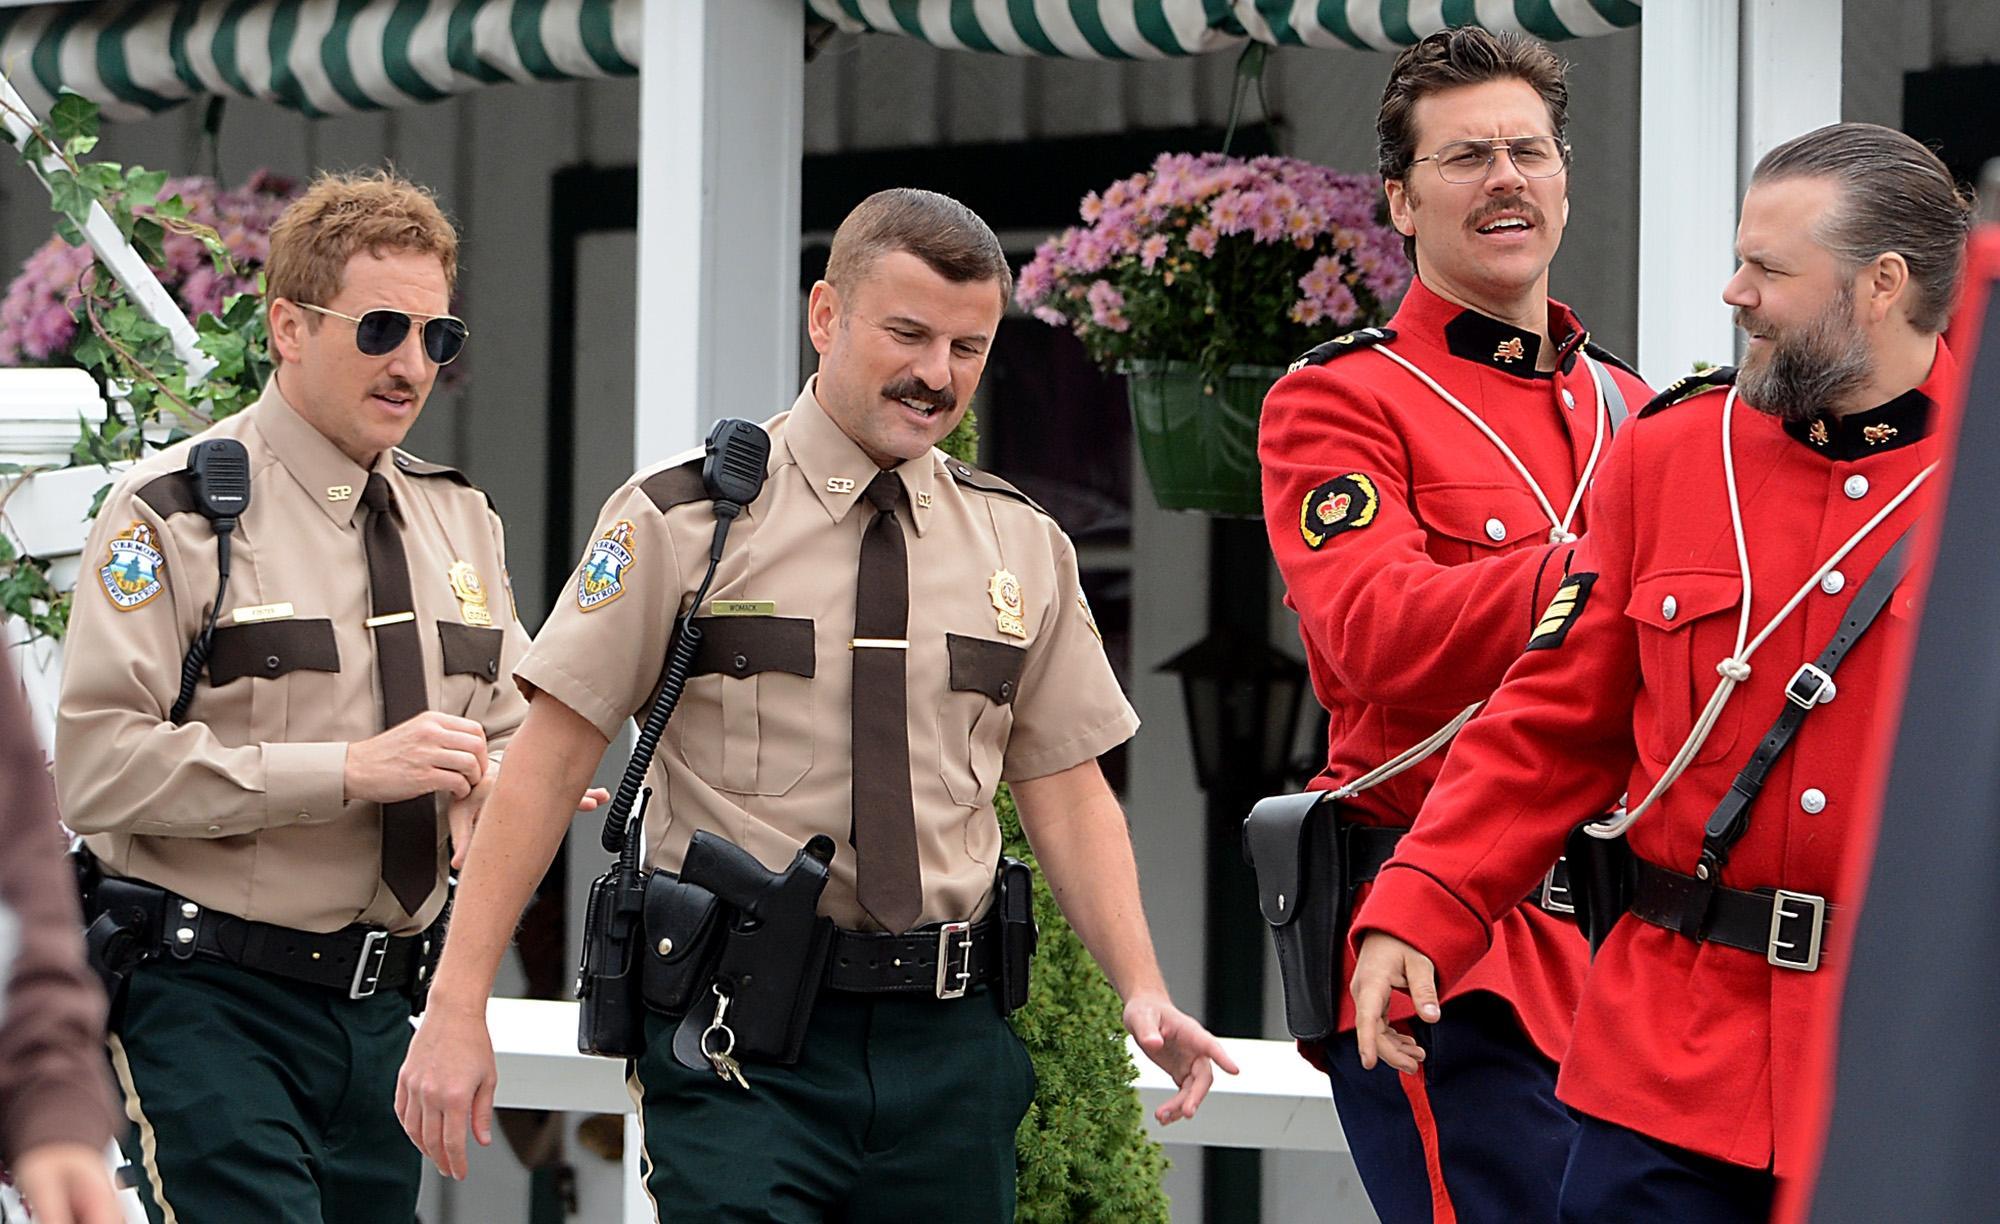 A brothel in Southborough? Nope, it's 'Super Troopers 2'